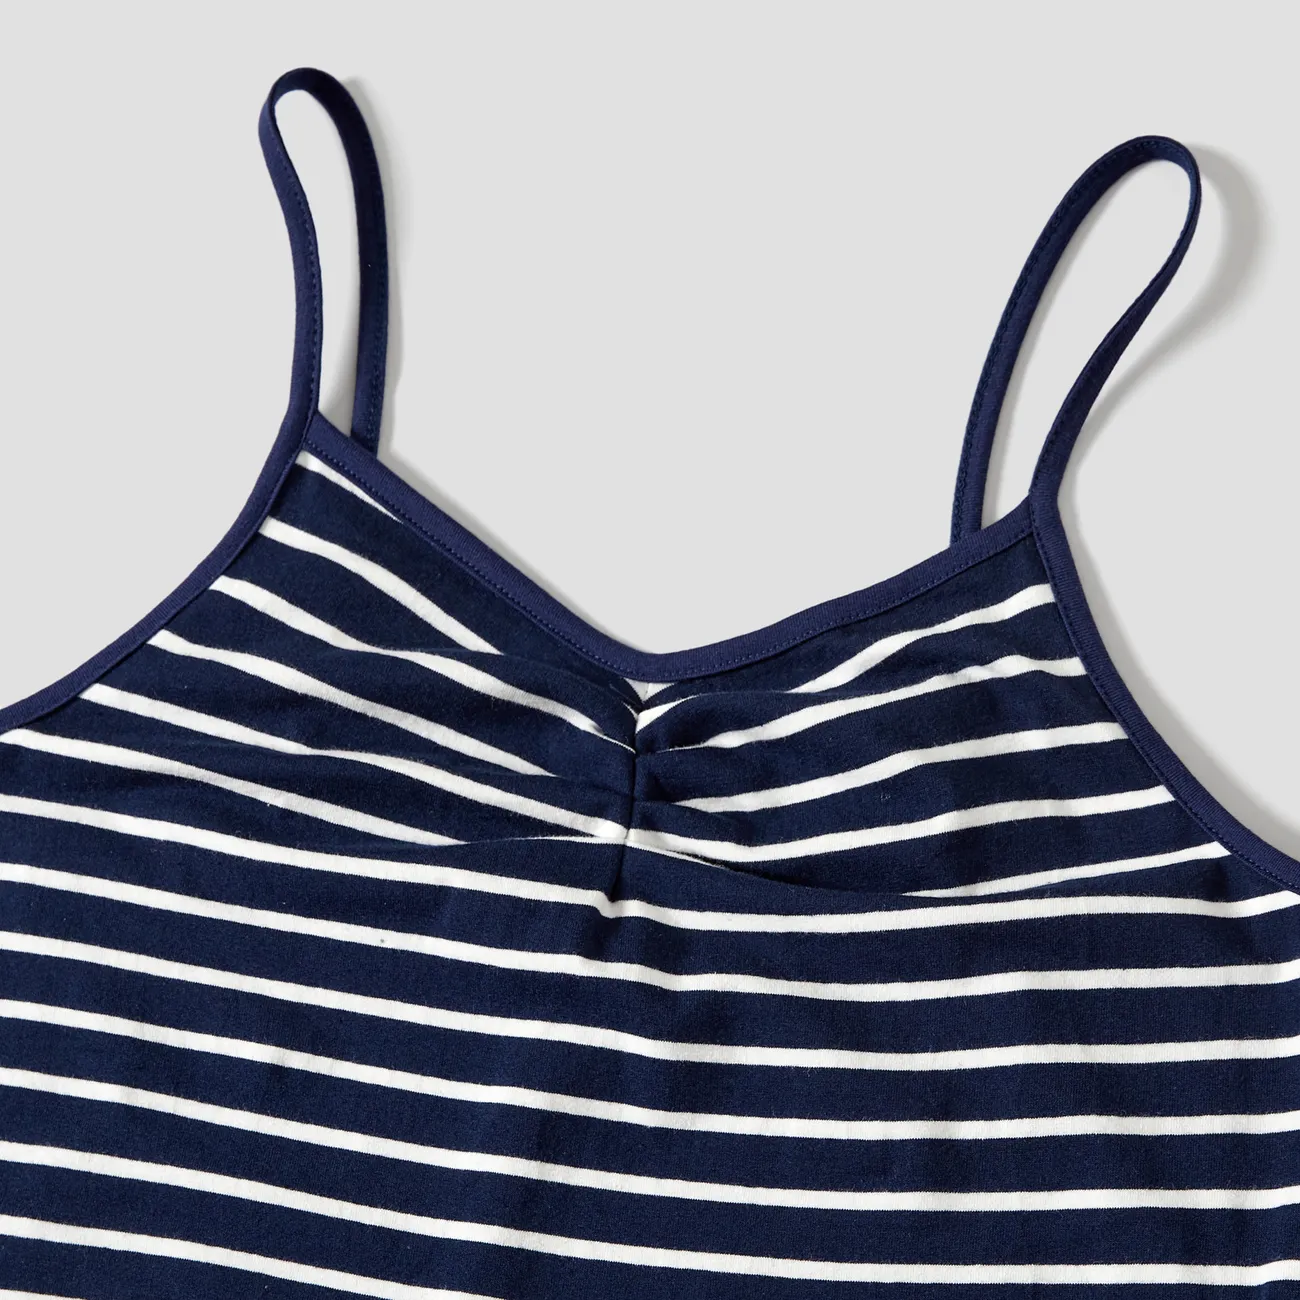 Family Matching Color Block Tee and Stripe Bodycon Strap Dress Sets Dark Blue big image 1